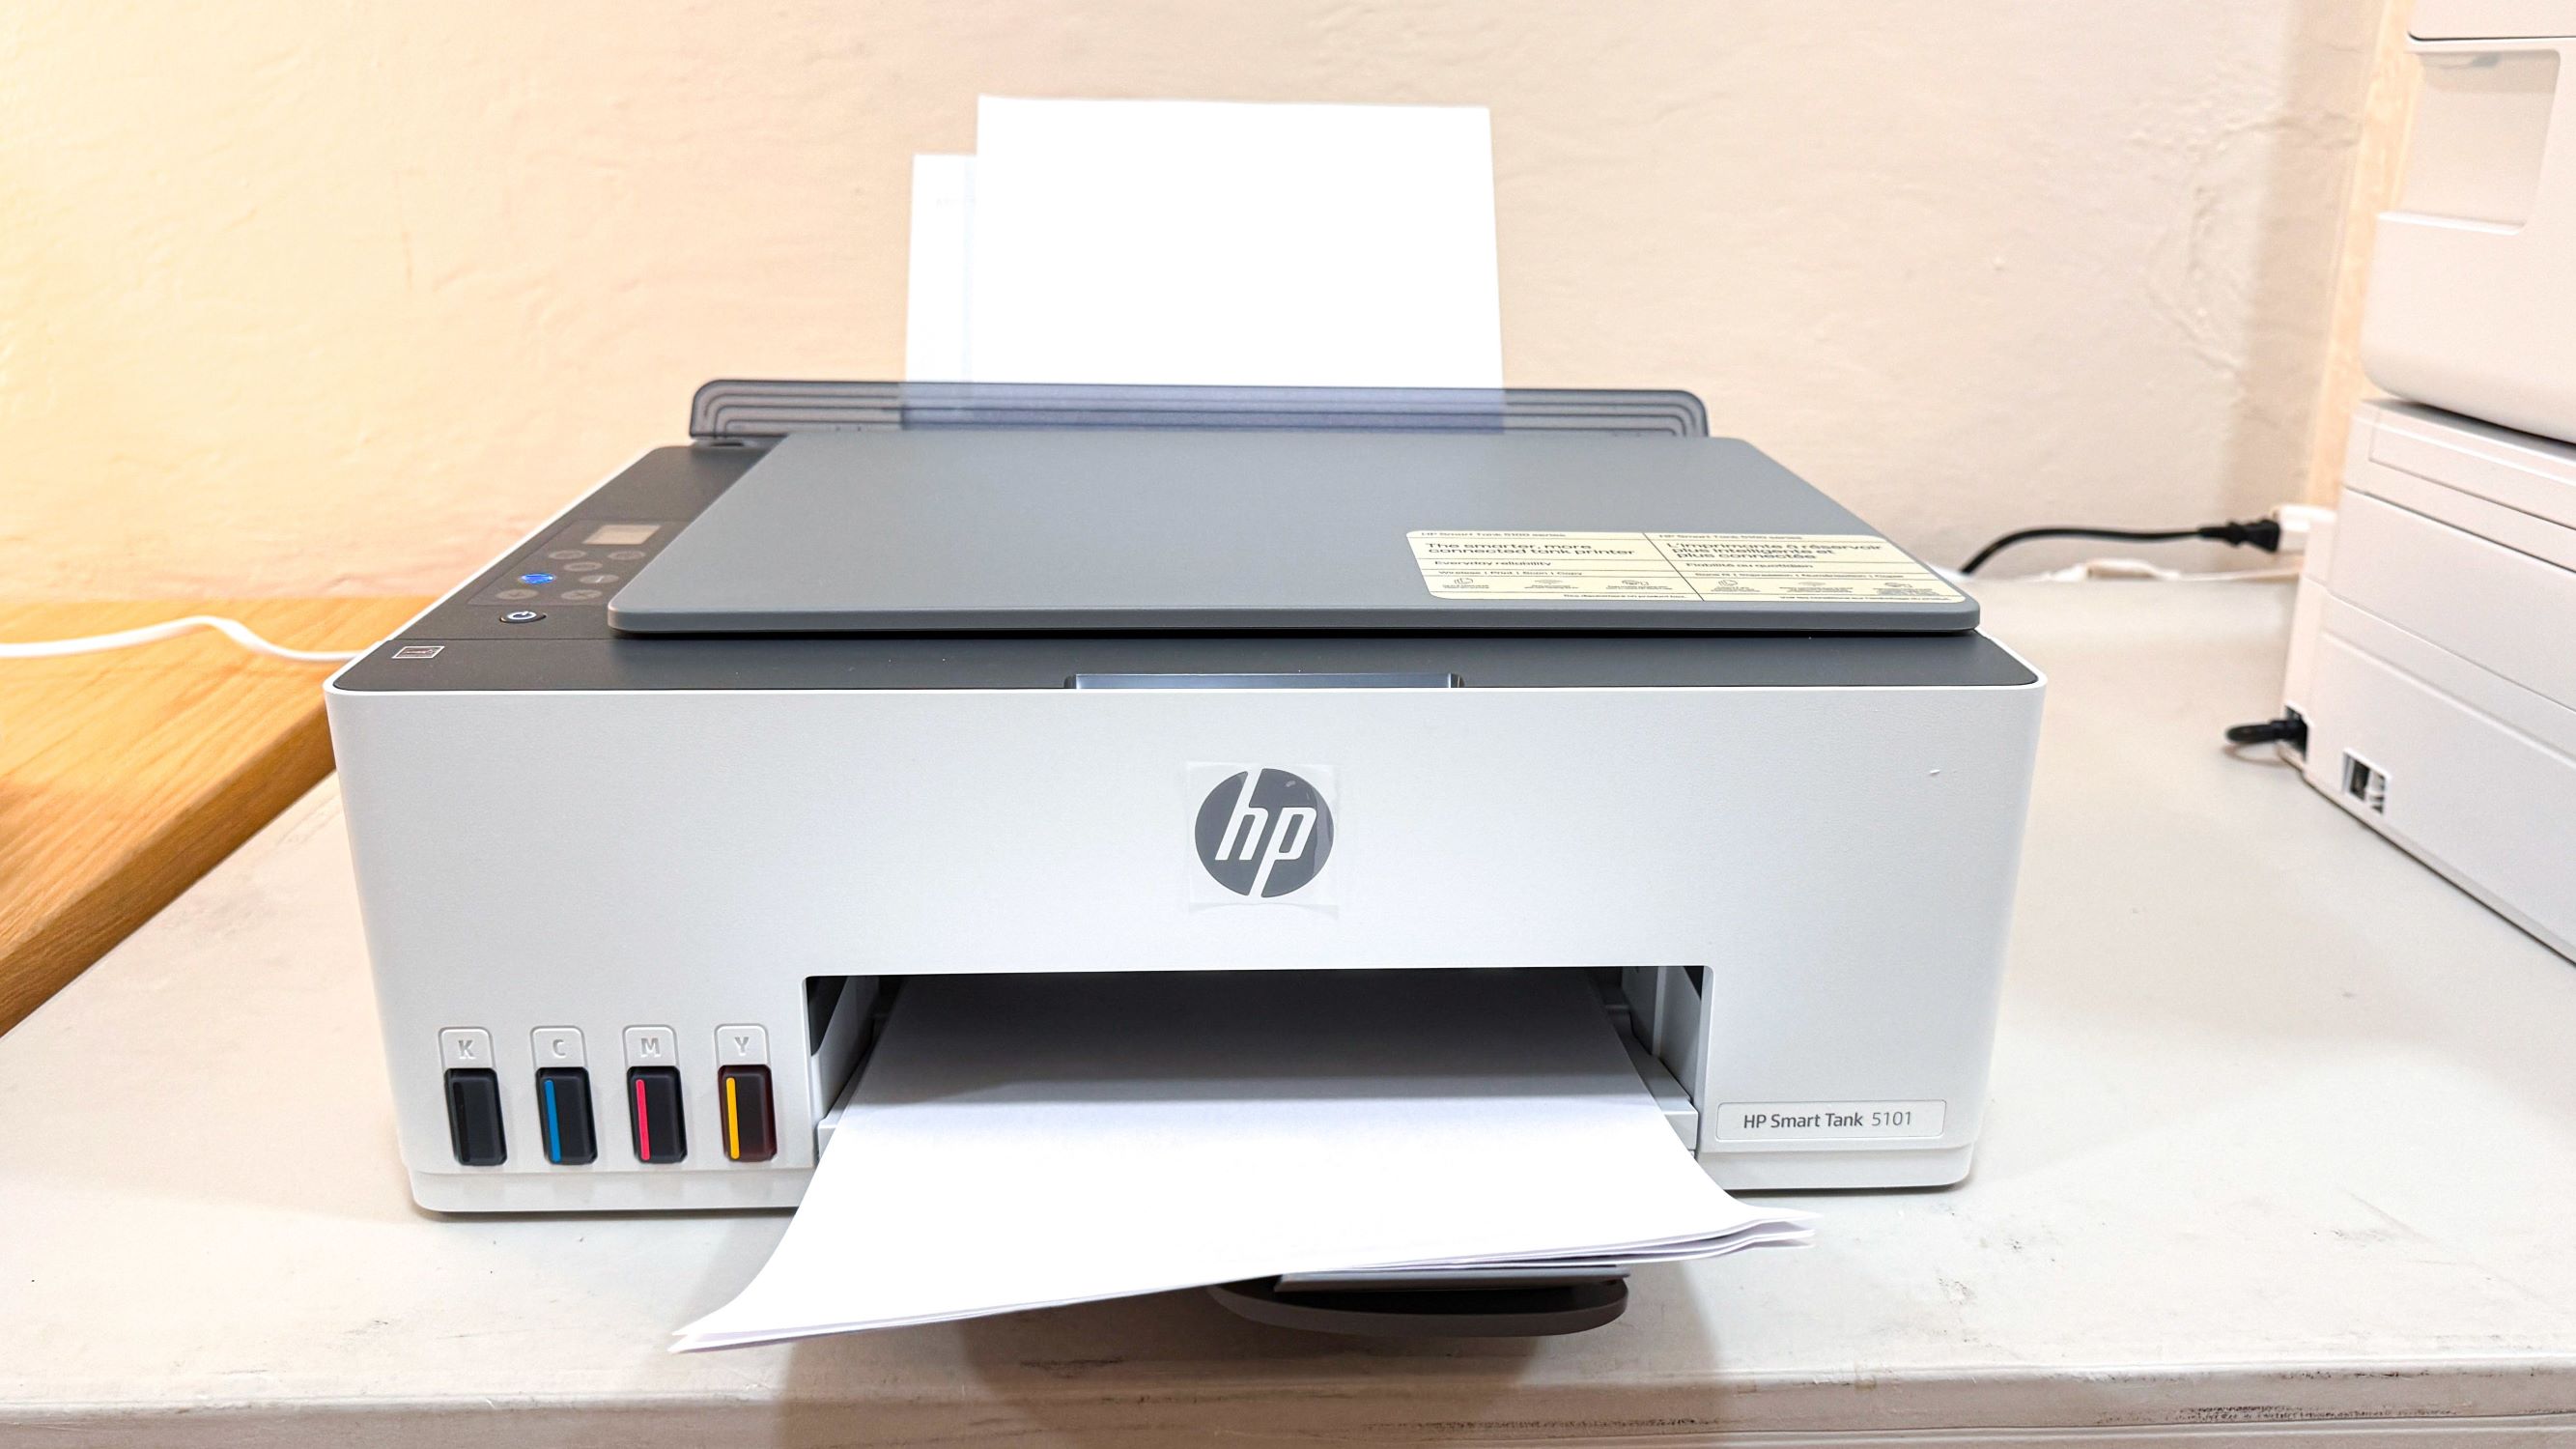 How To Connect My HP Printer To New Wi-Fi